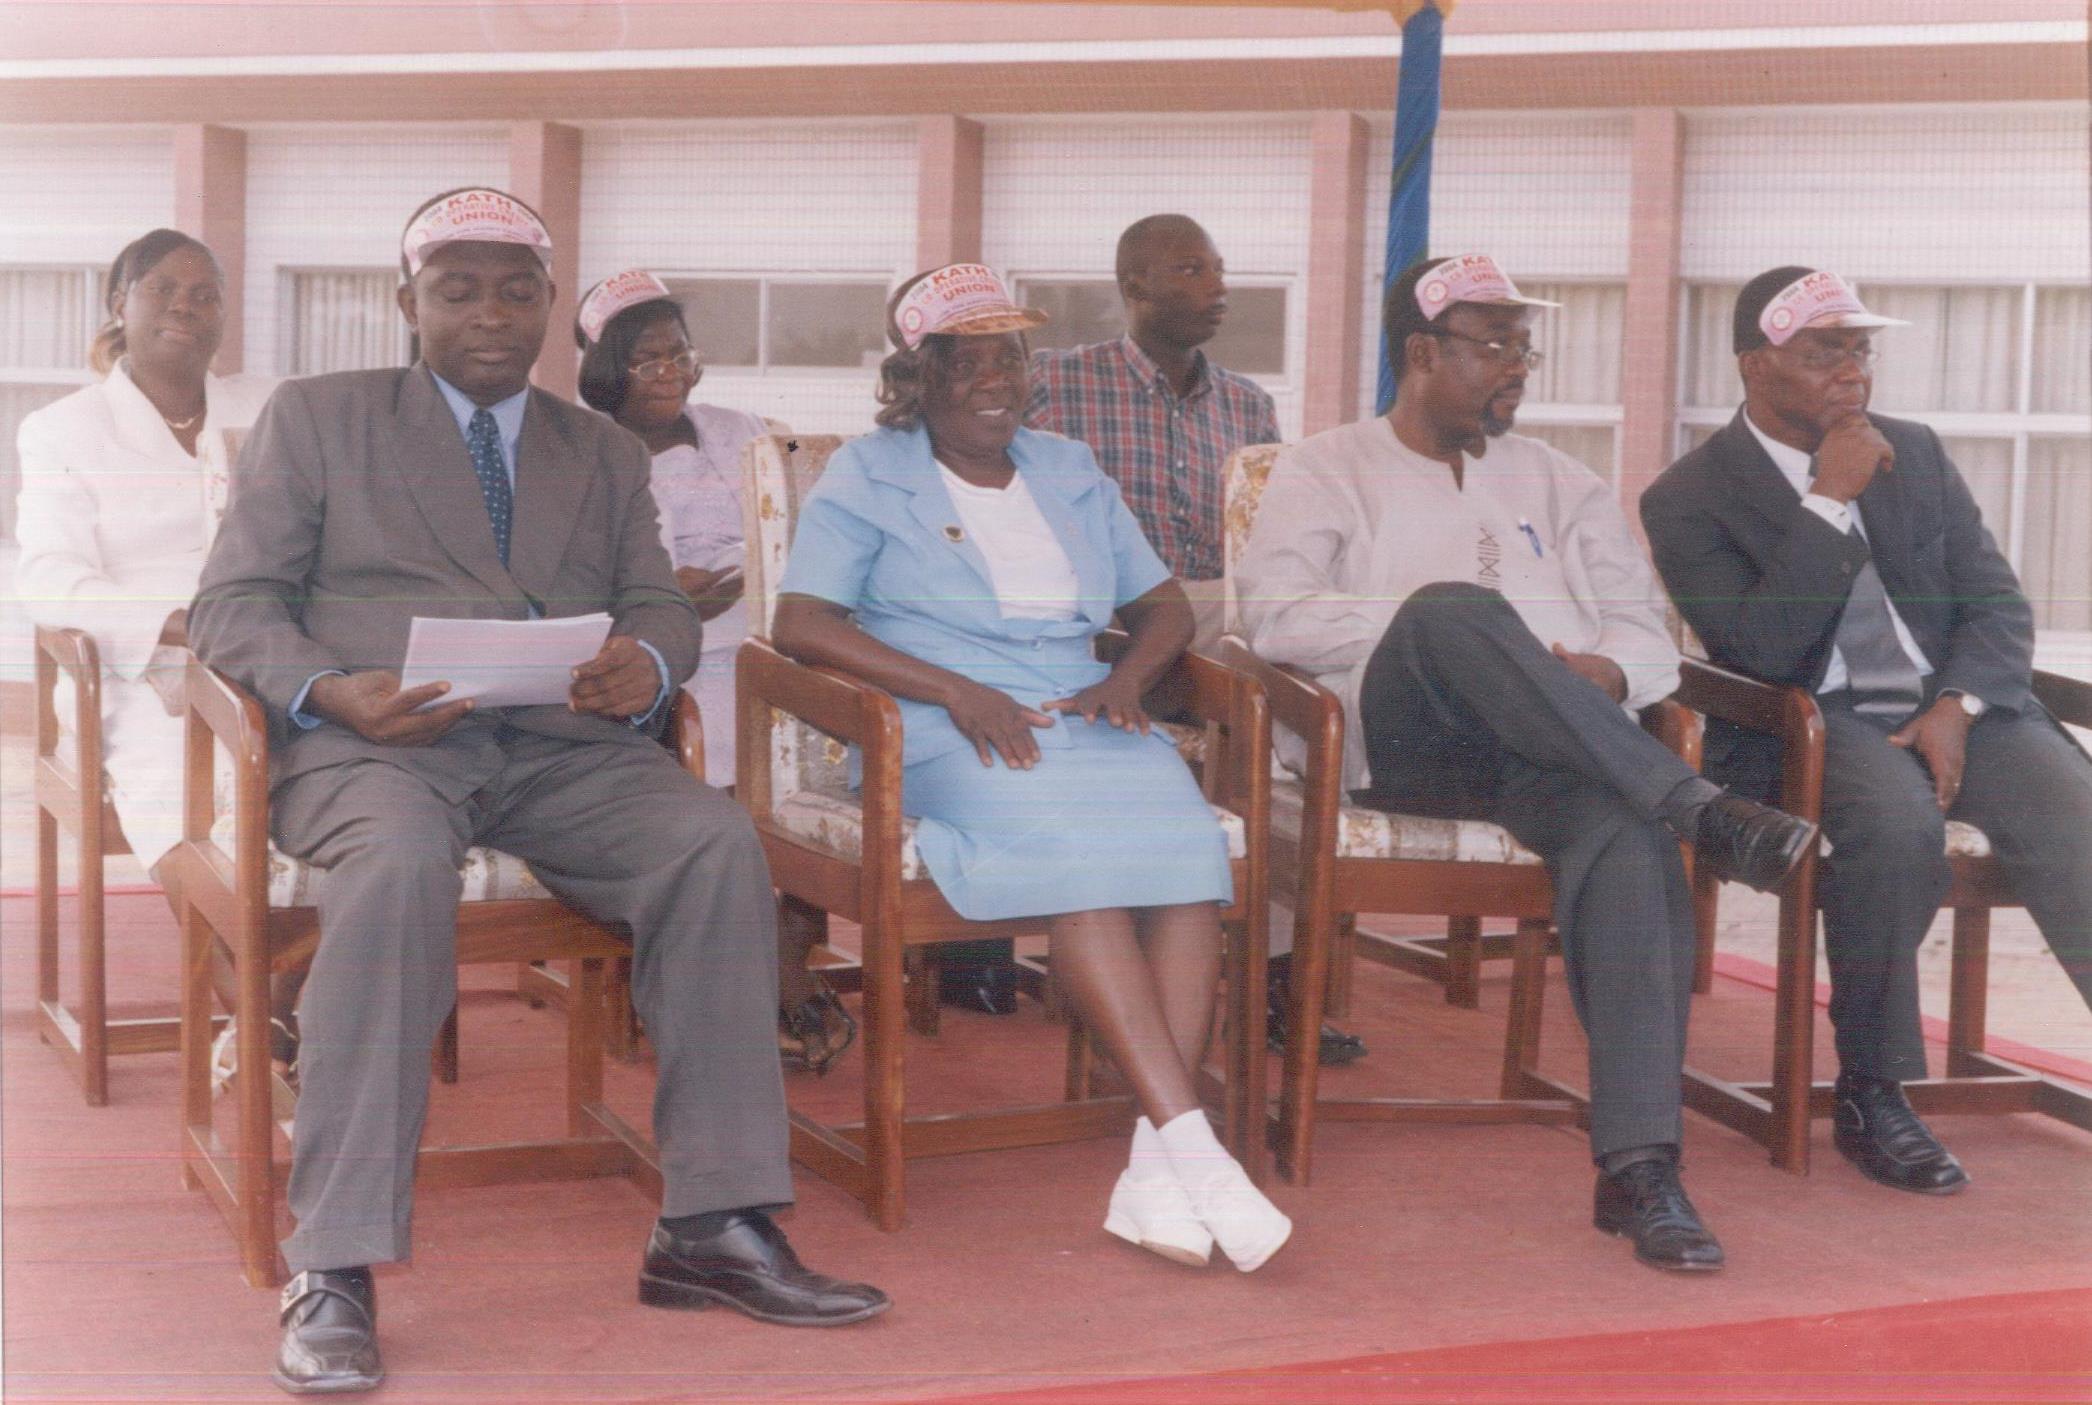 From left to right - Mr. Isaiah Offe-Gyimah (then Director of Administration, KATH),Mrs. Margaret Atiemo,(Retired Director of Nursing, KATH), Dr. Anthony Nsiah Asare (then CEO of KATH), Dr. Charles Anane (Medicine Directorate, KATH)